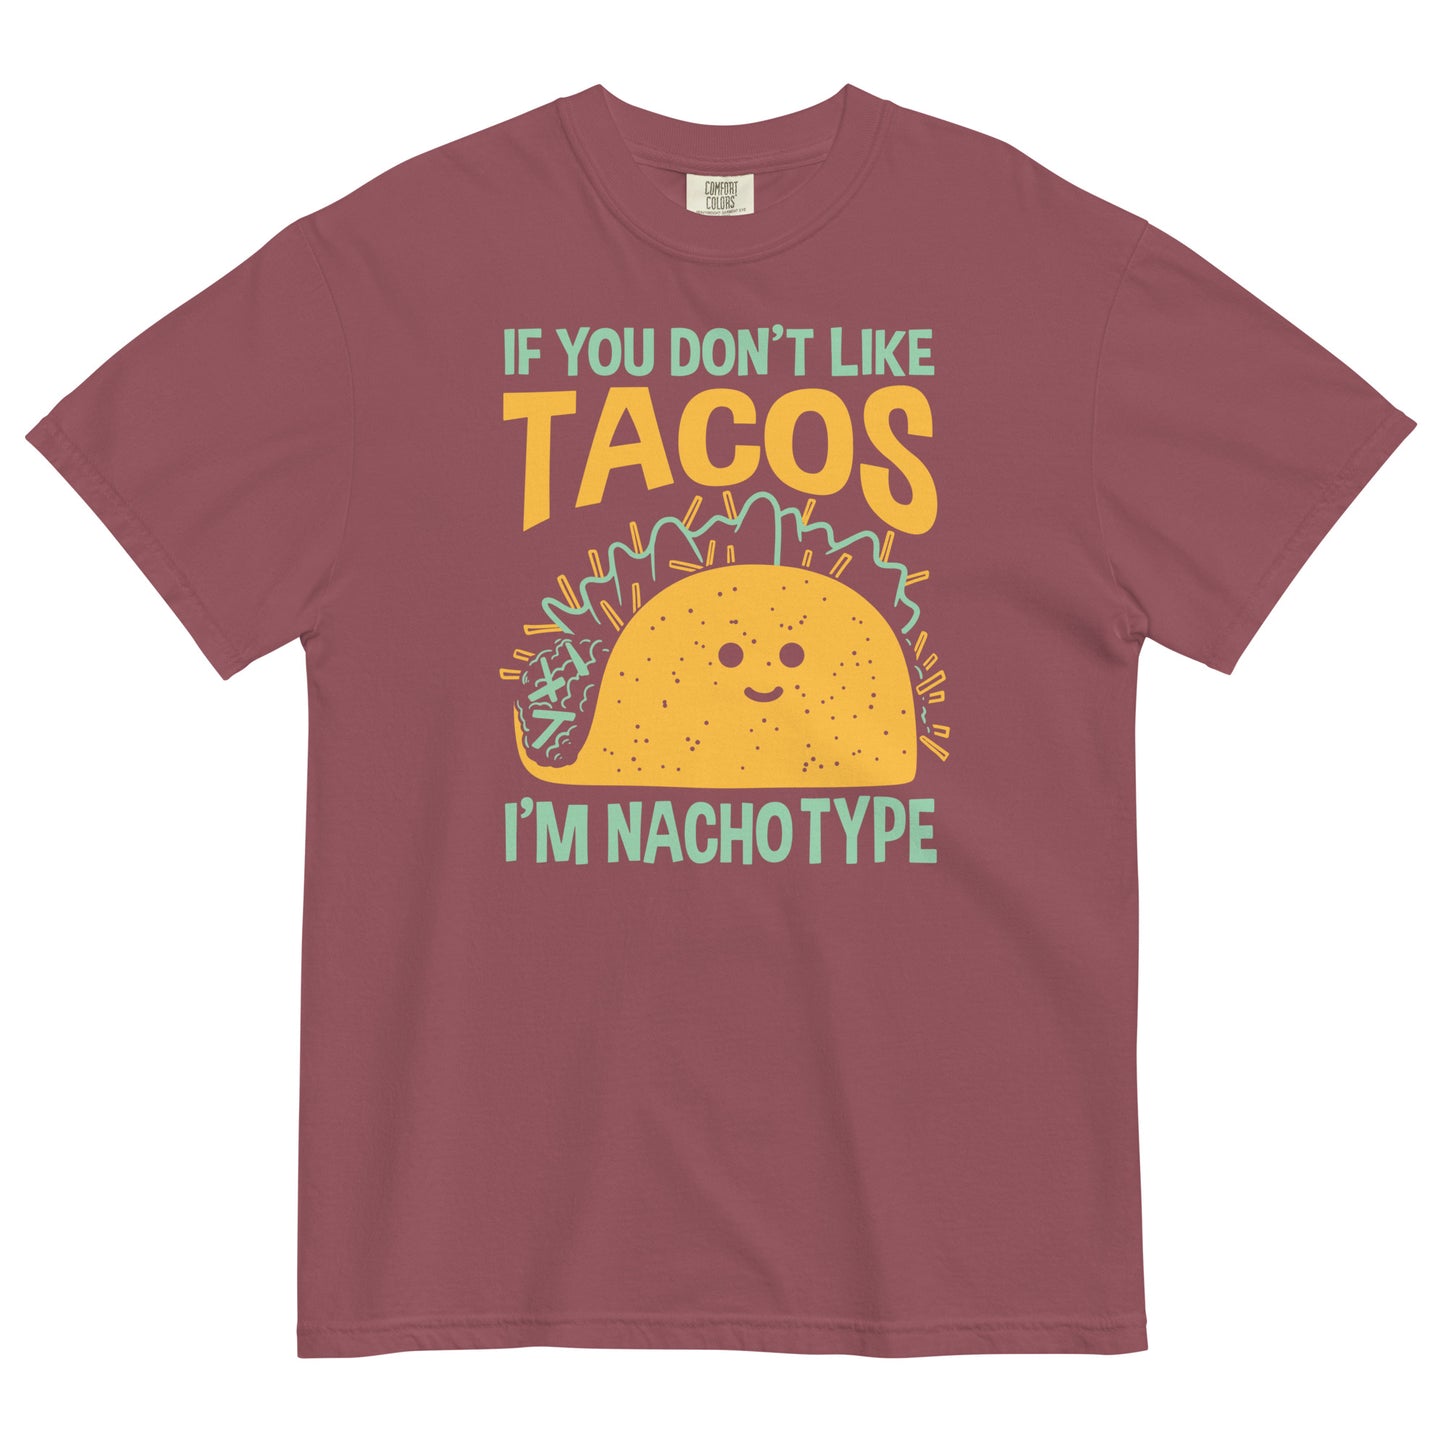 I'm Nacho Type Men's Relaxed Fit Tee